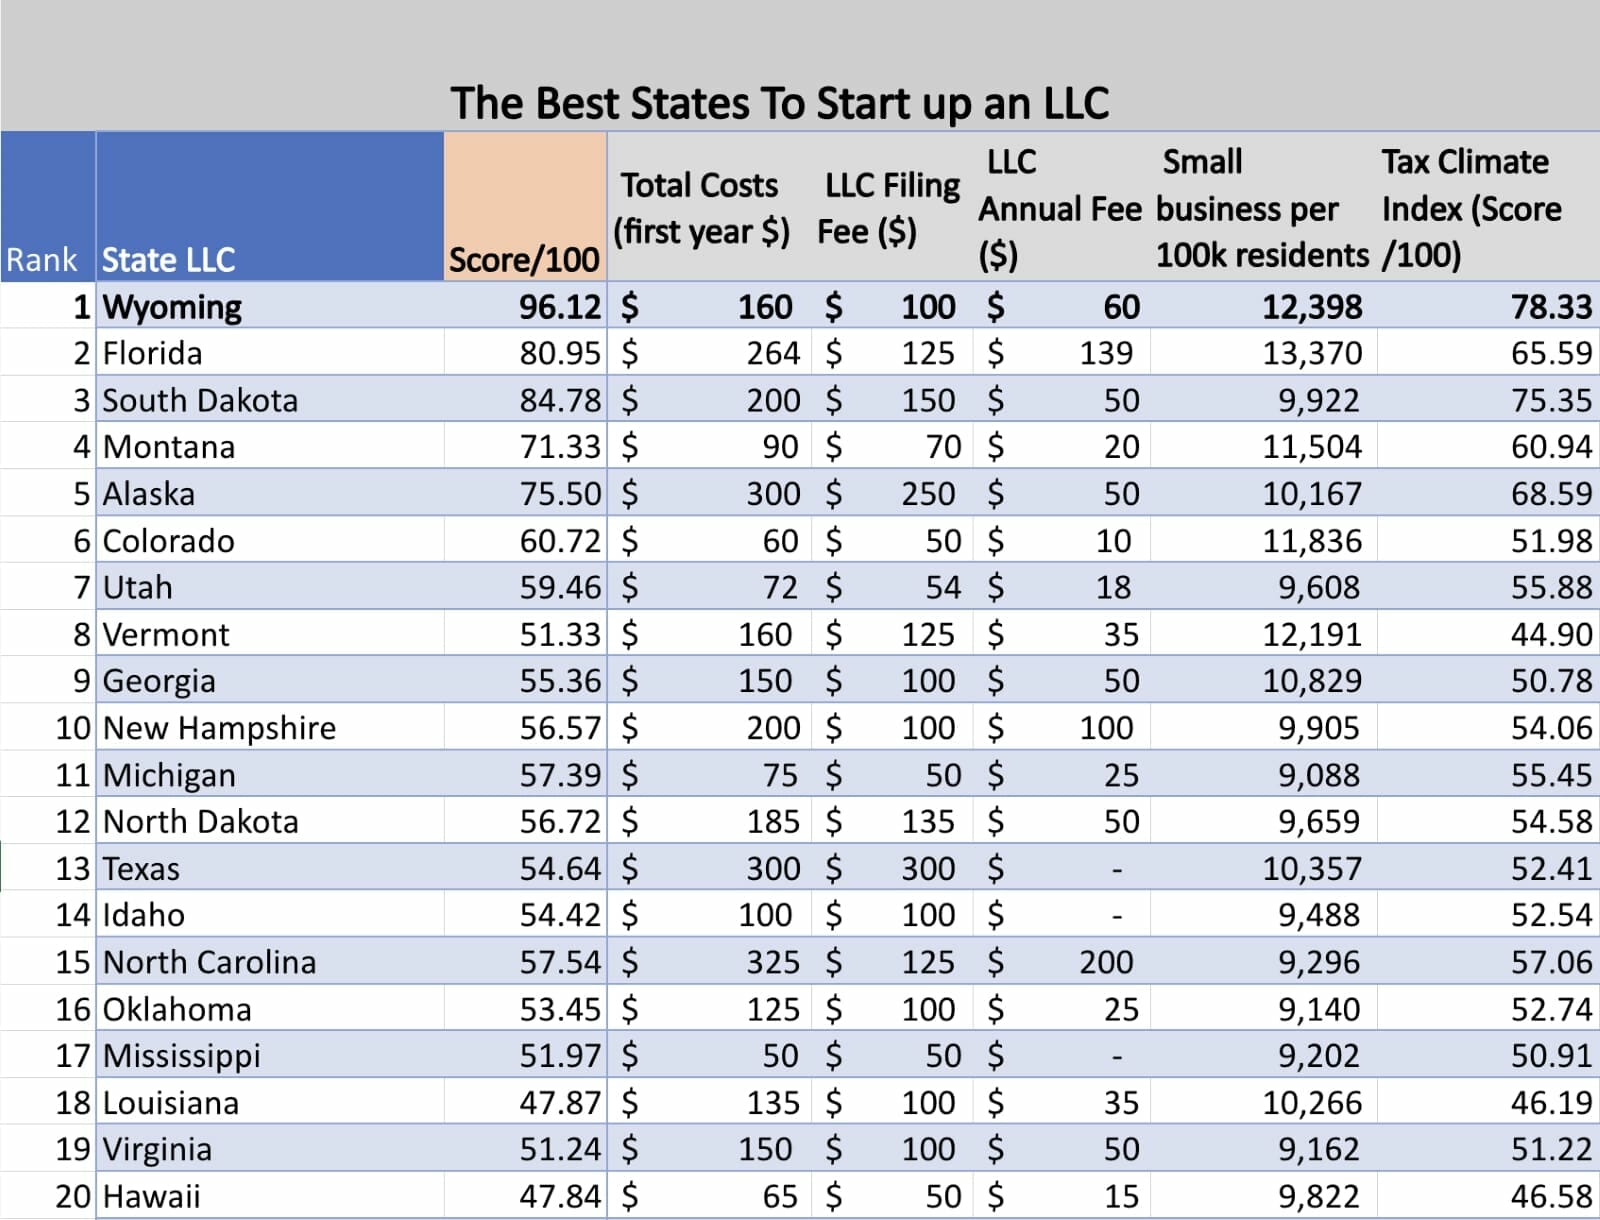 The Best States To Startup An LLC